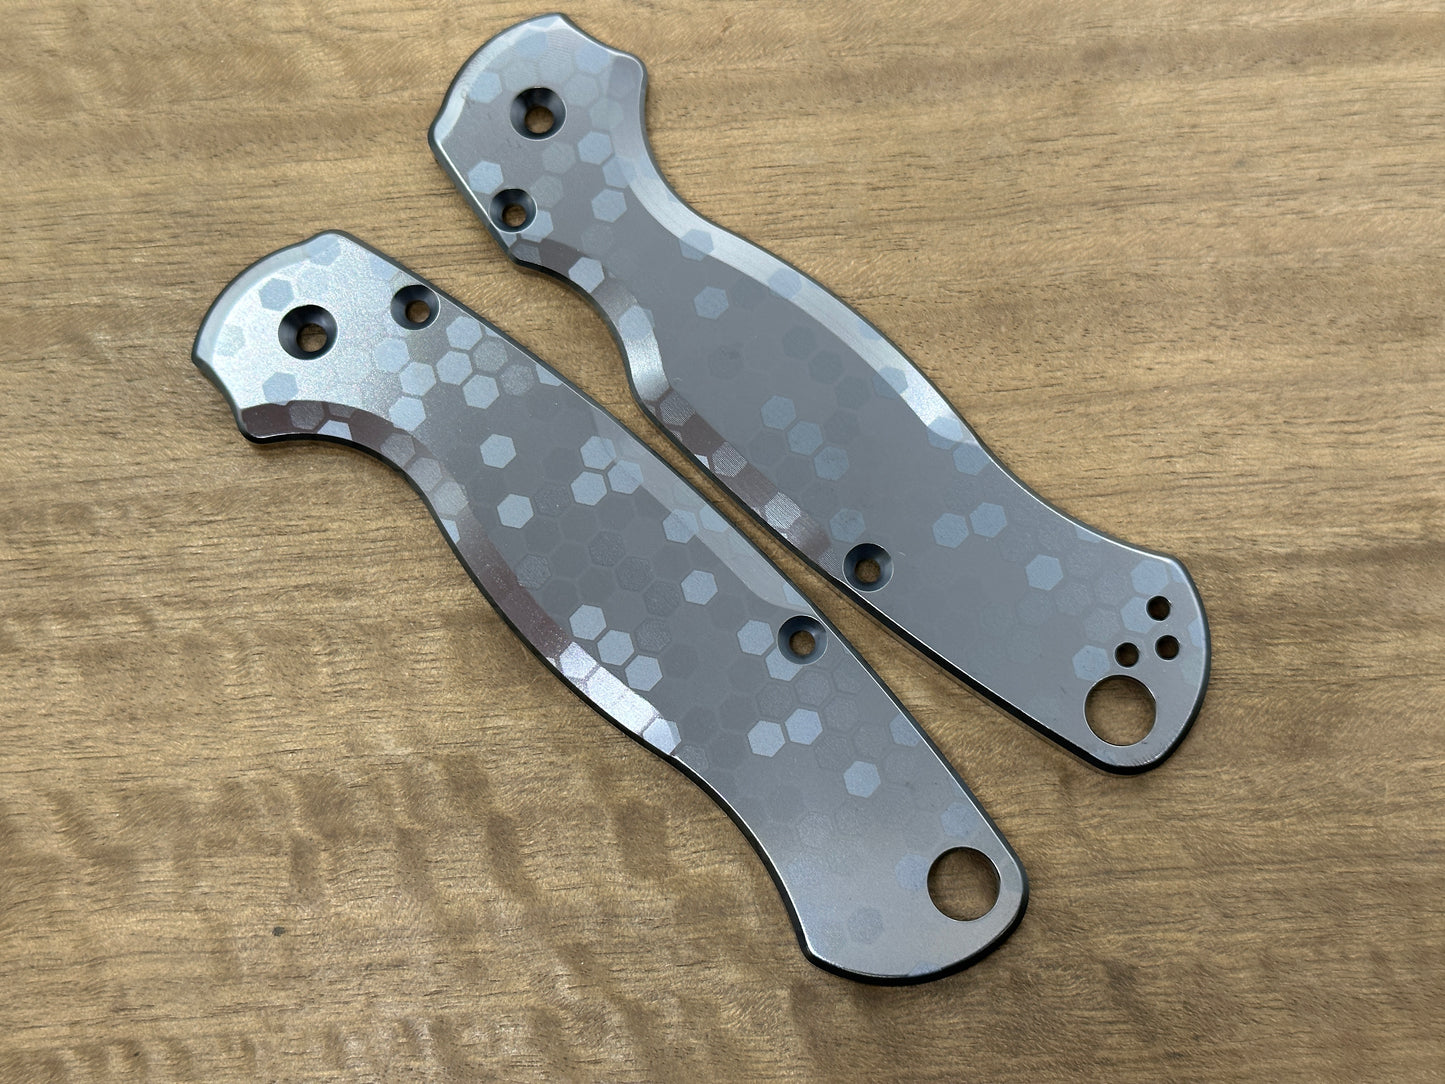 HONEYCOMB Black-Silver Heat ano Titanium scales for Spyderco Paramilitary 2 PM2